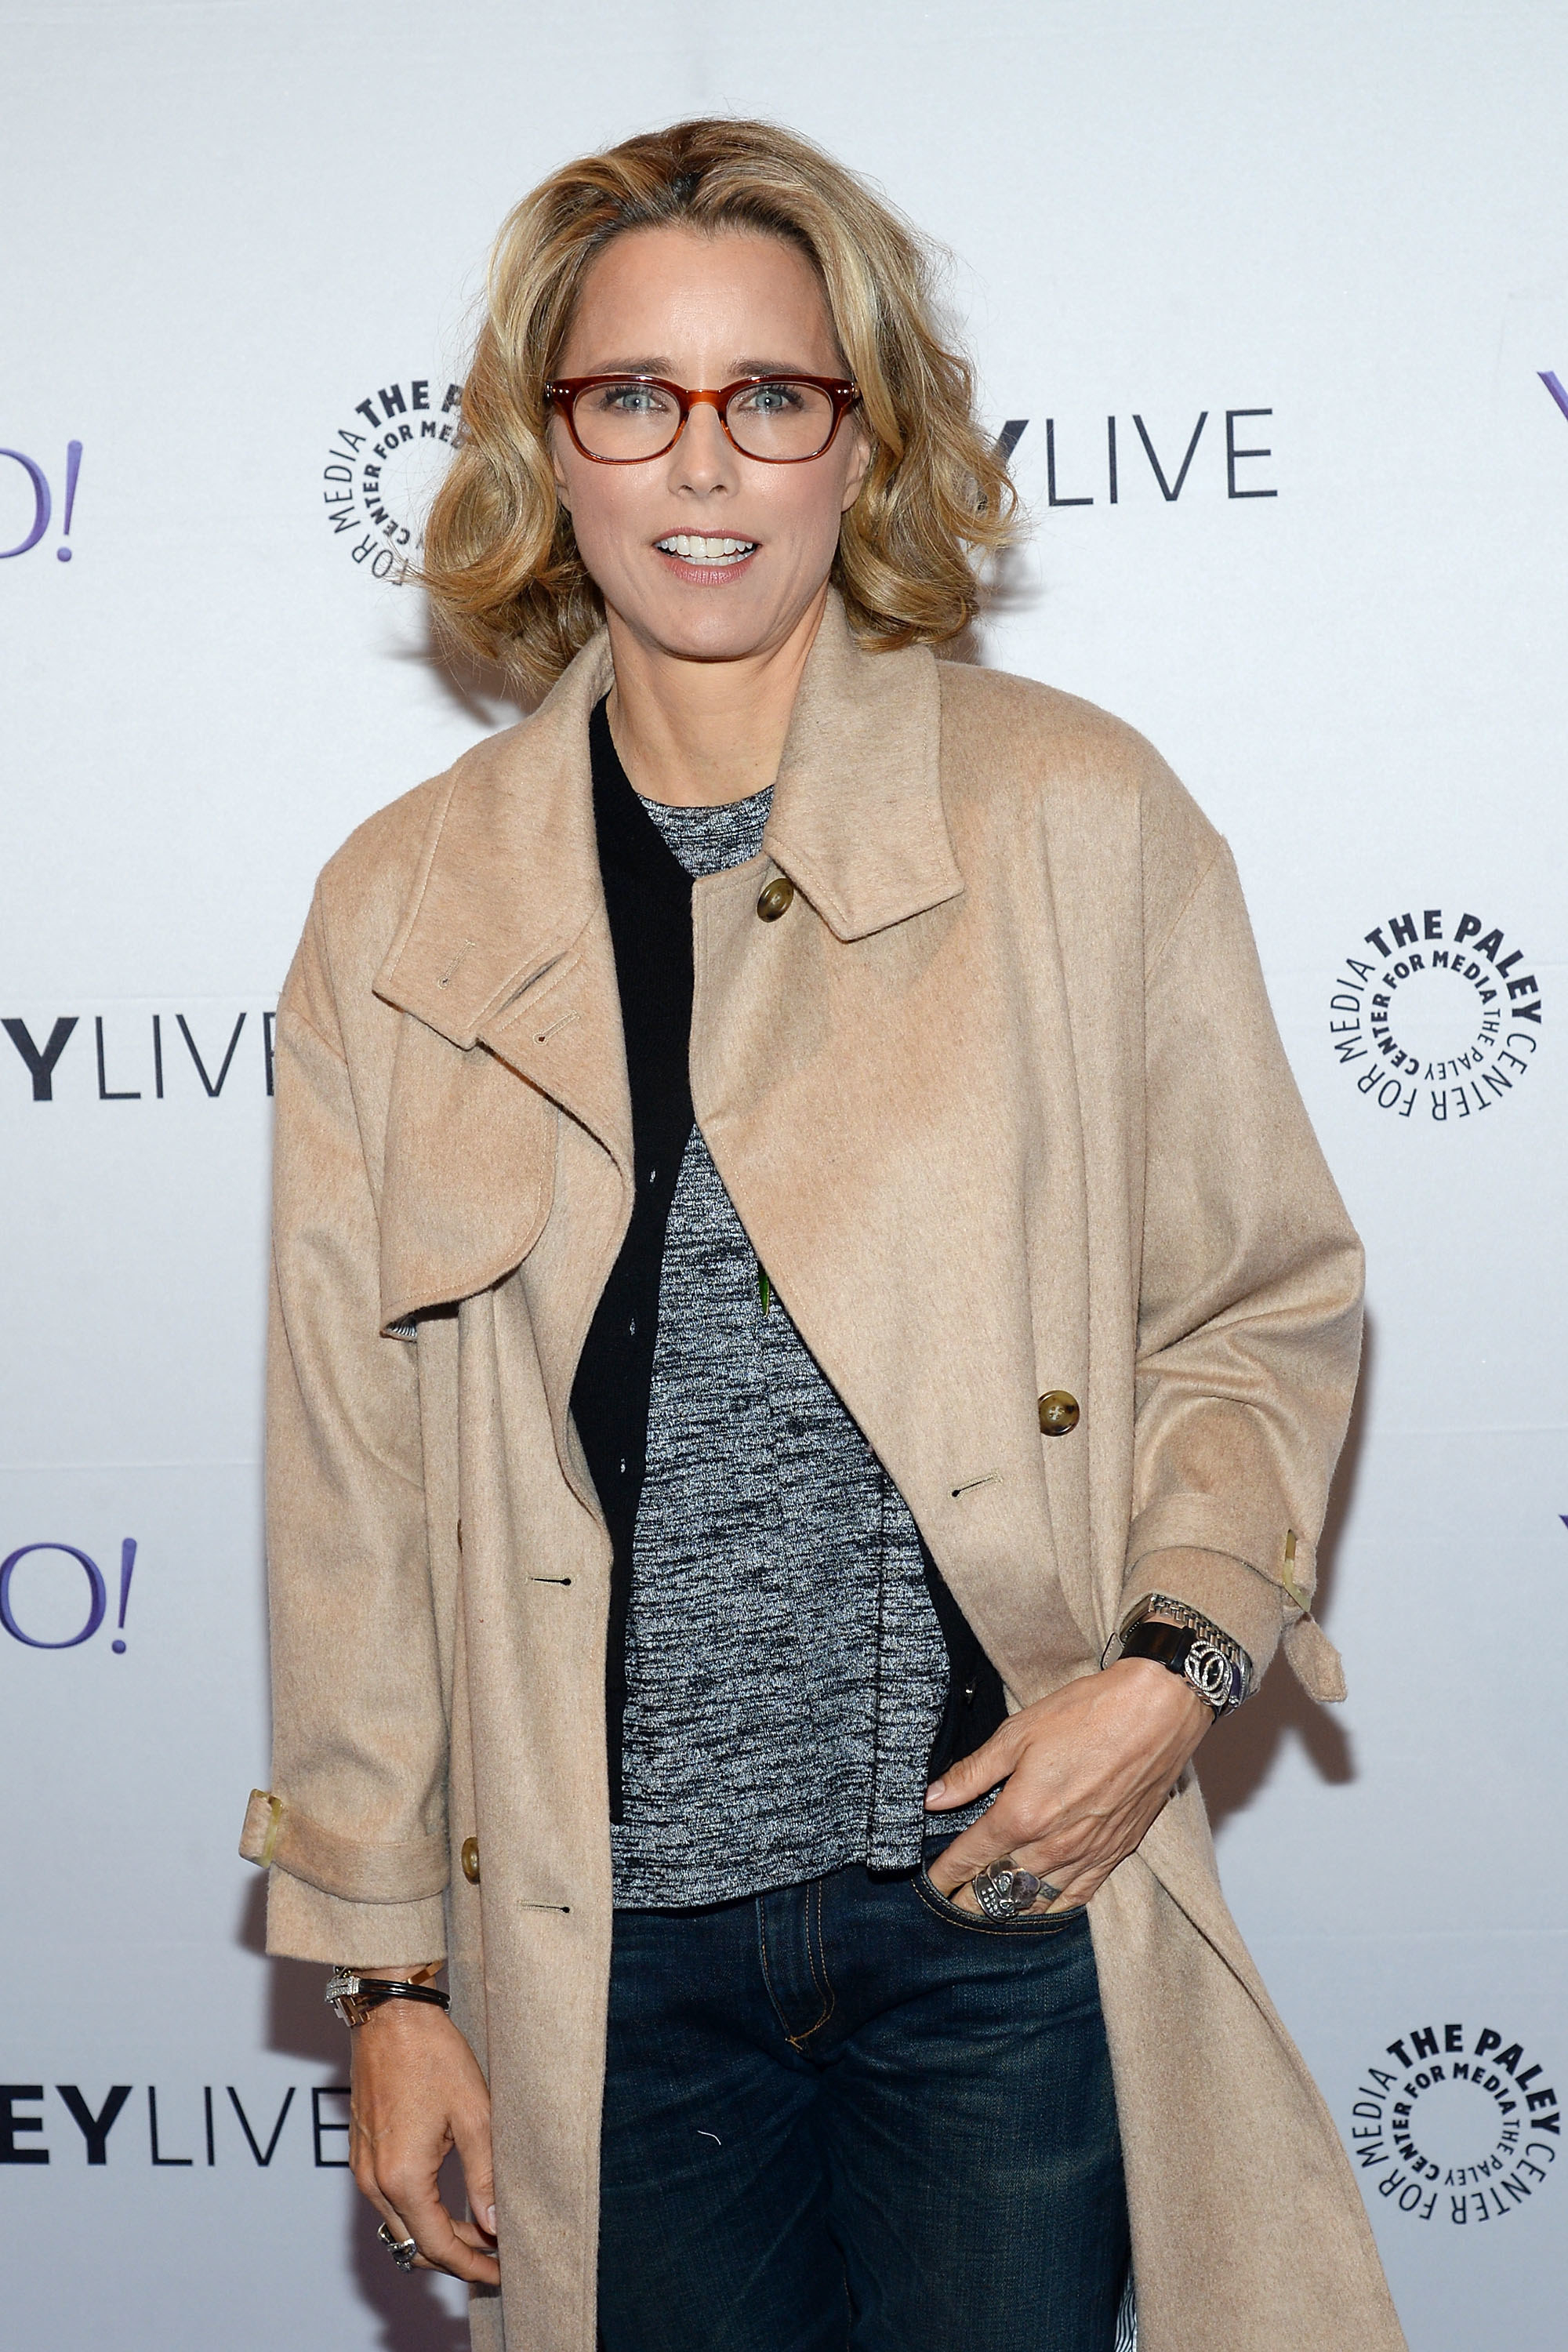 Téa Leoni stands with one hand in her pocket